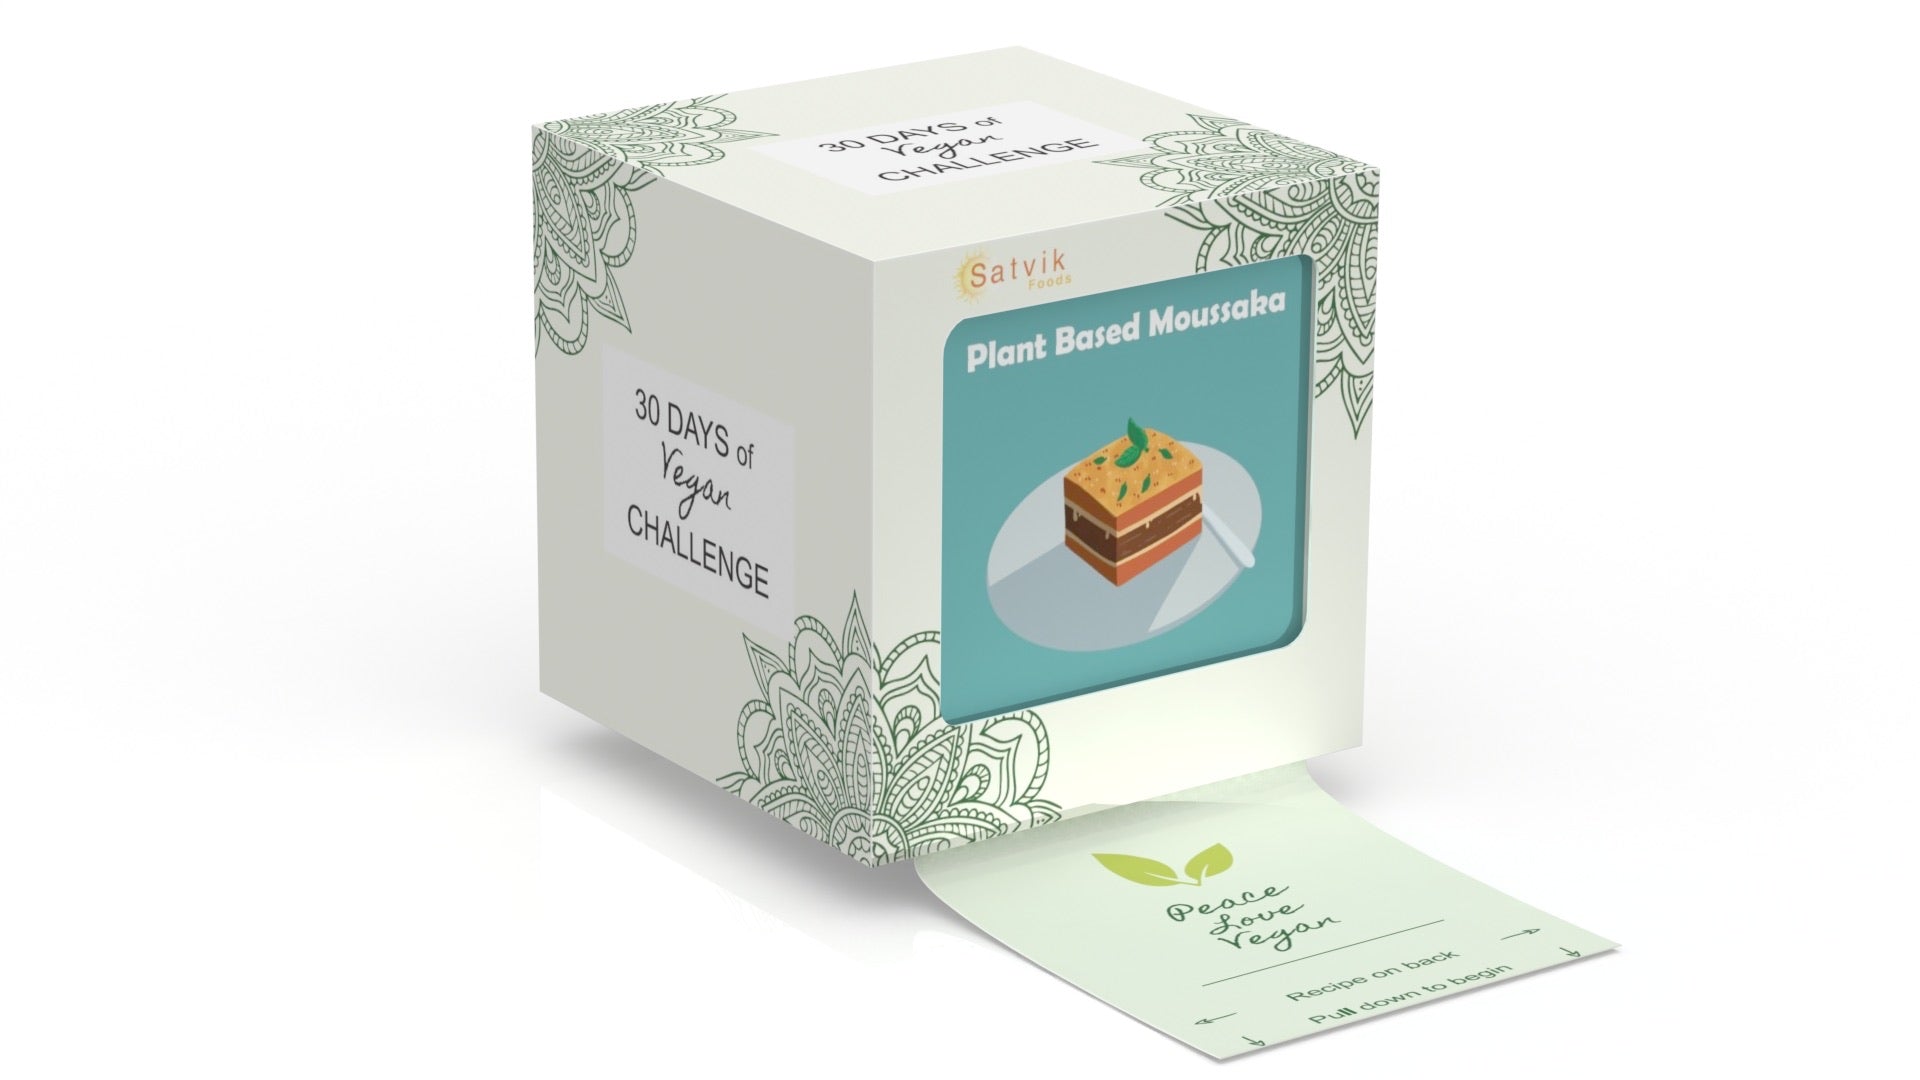 Satvik foods recipe box features 30 vegan recipes that are super simple and quick to prepare, great for meal ideas and inspiration. The box features little tear off recipe cards that can be used over and over again 